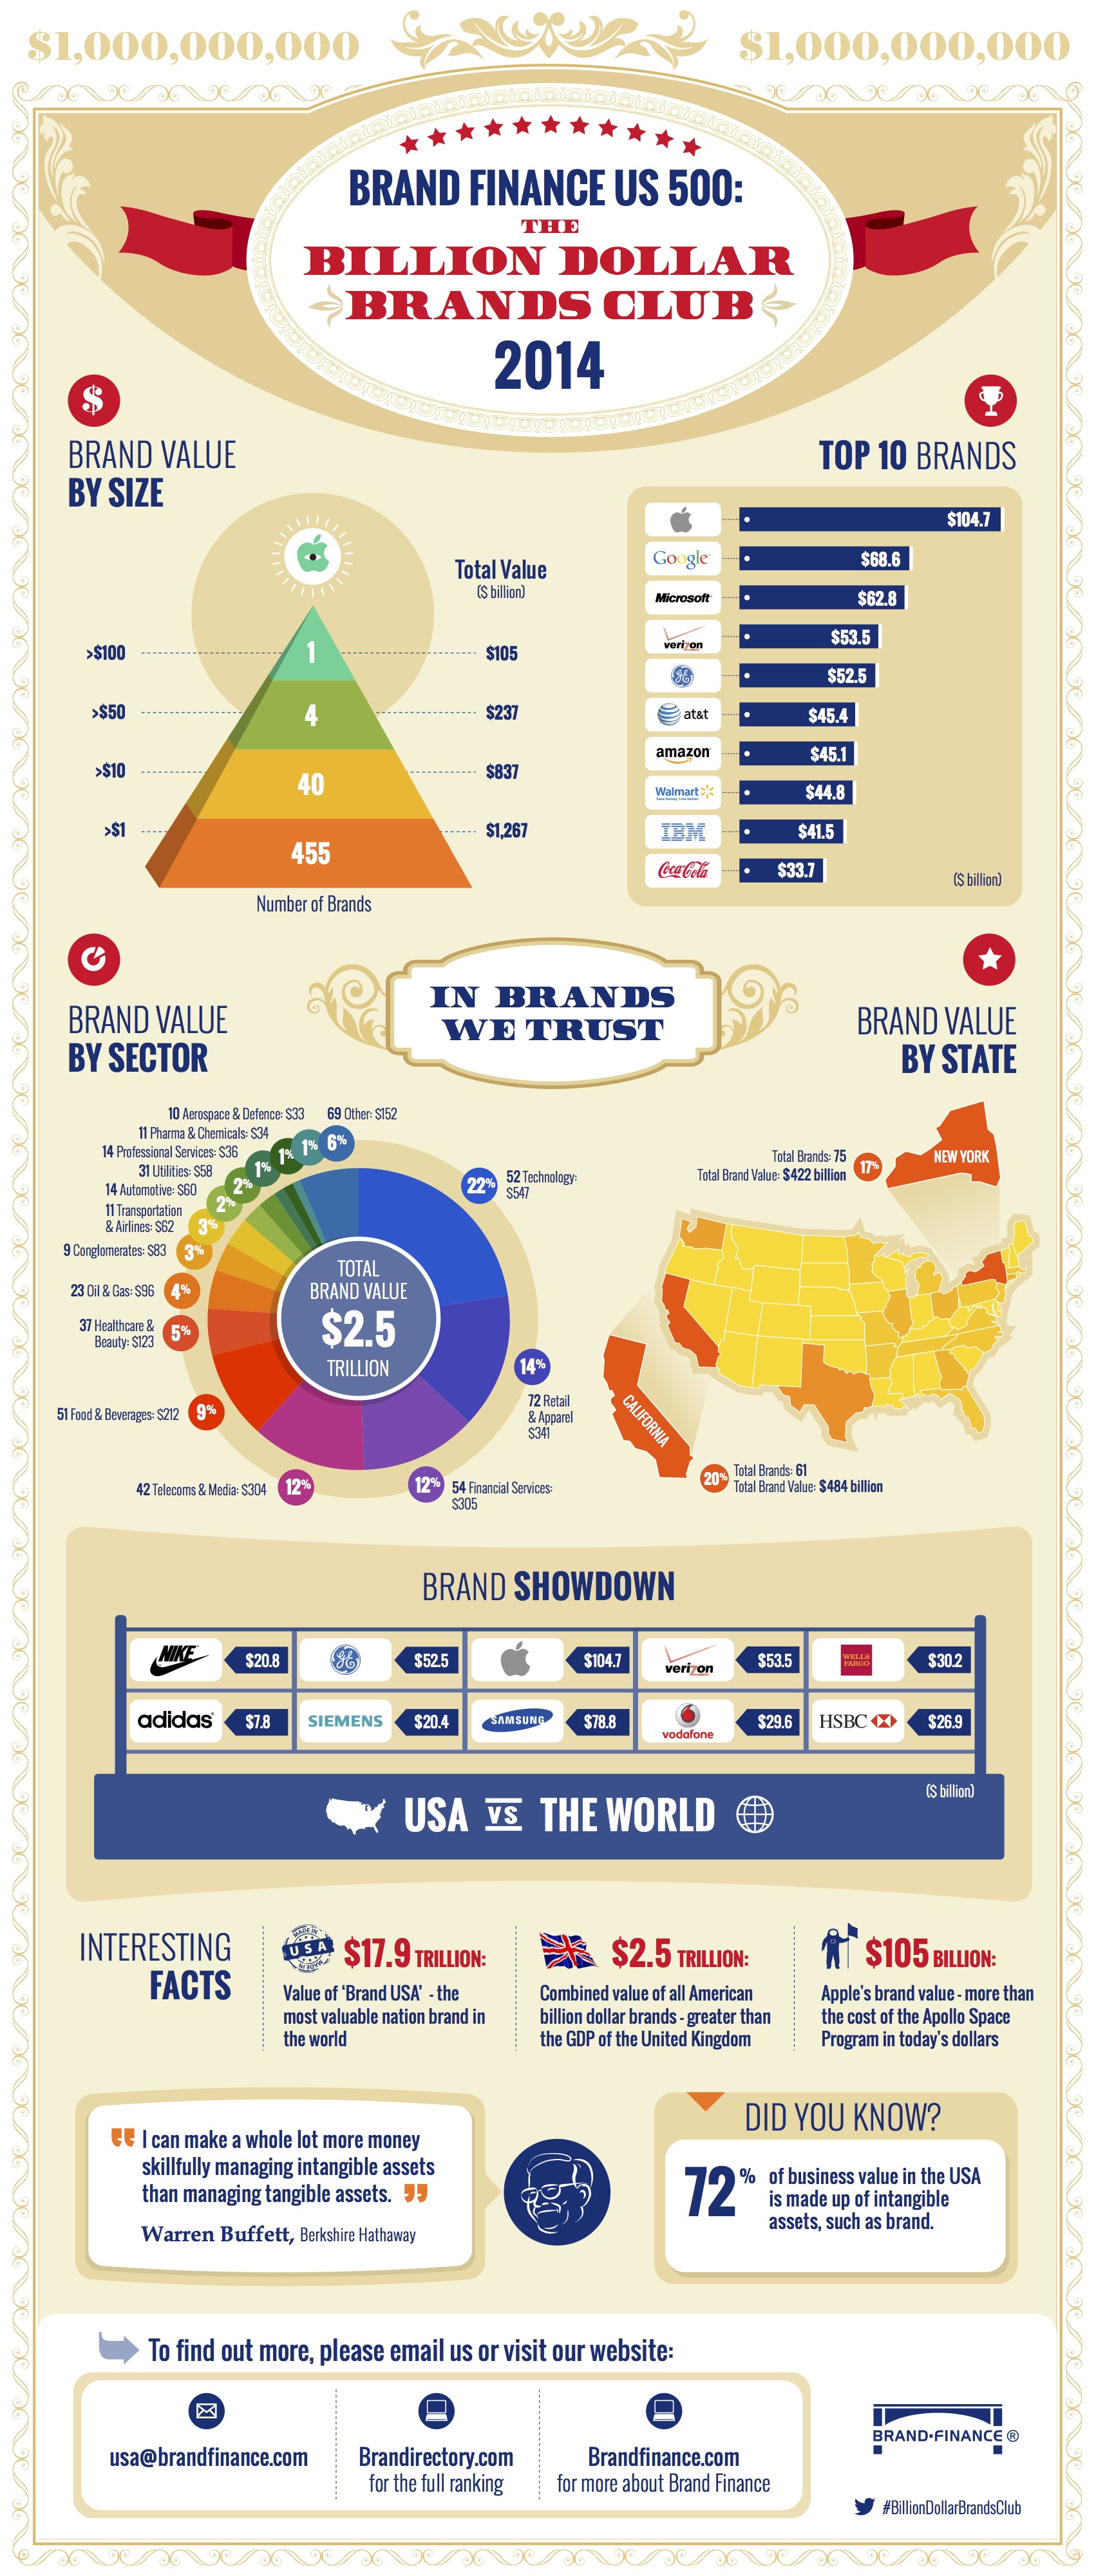 Apple Ranked as Most Valuable Brand in the U.S.A. [Infographic]